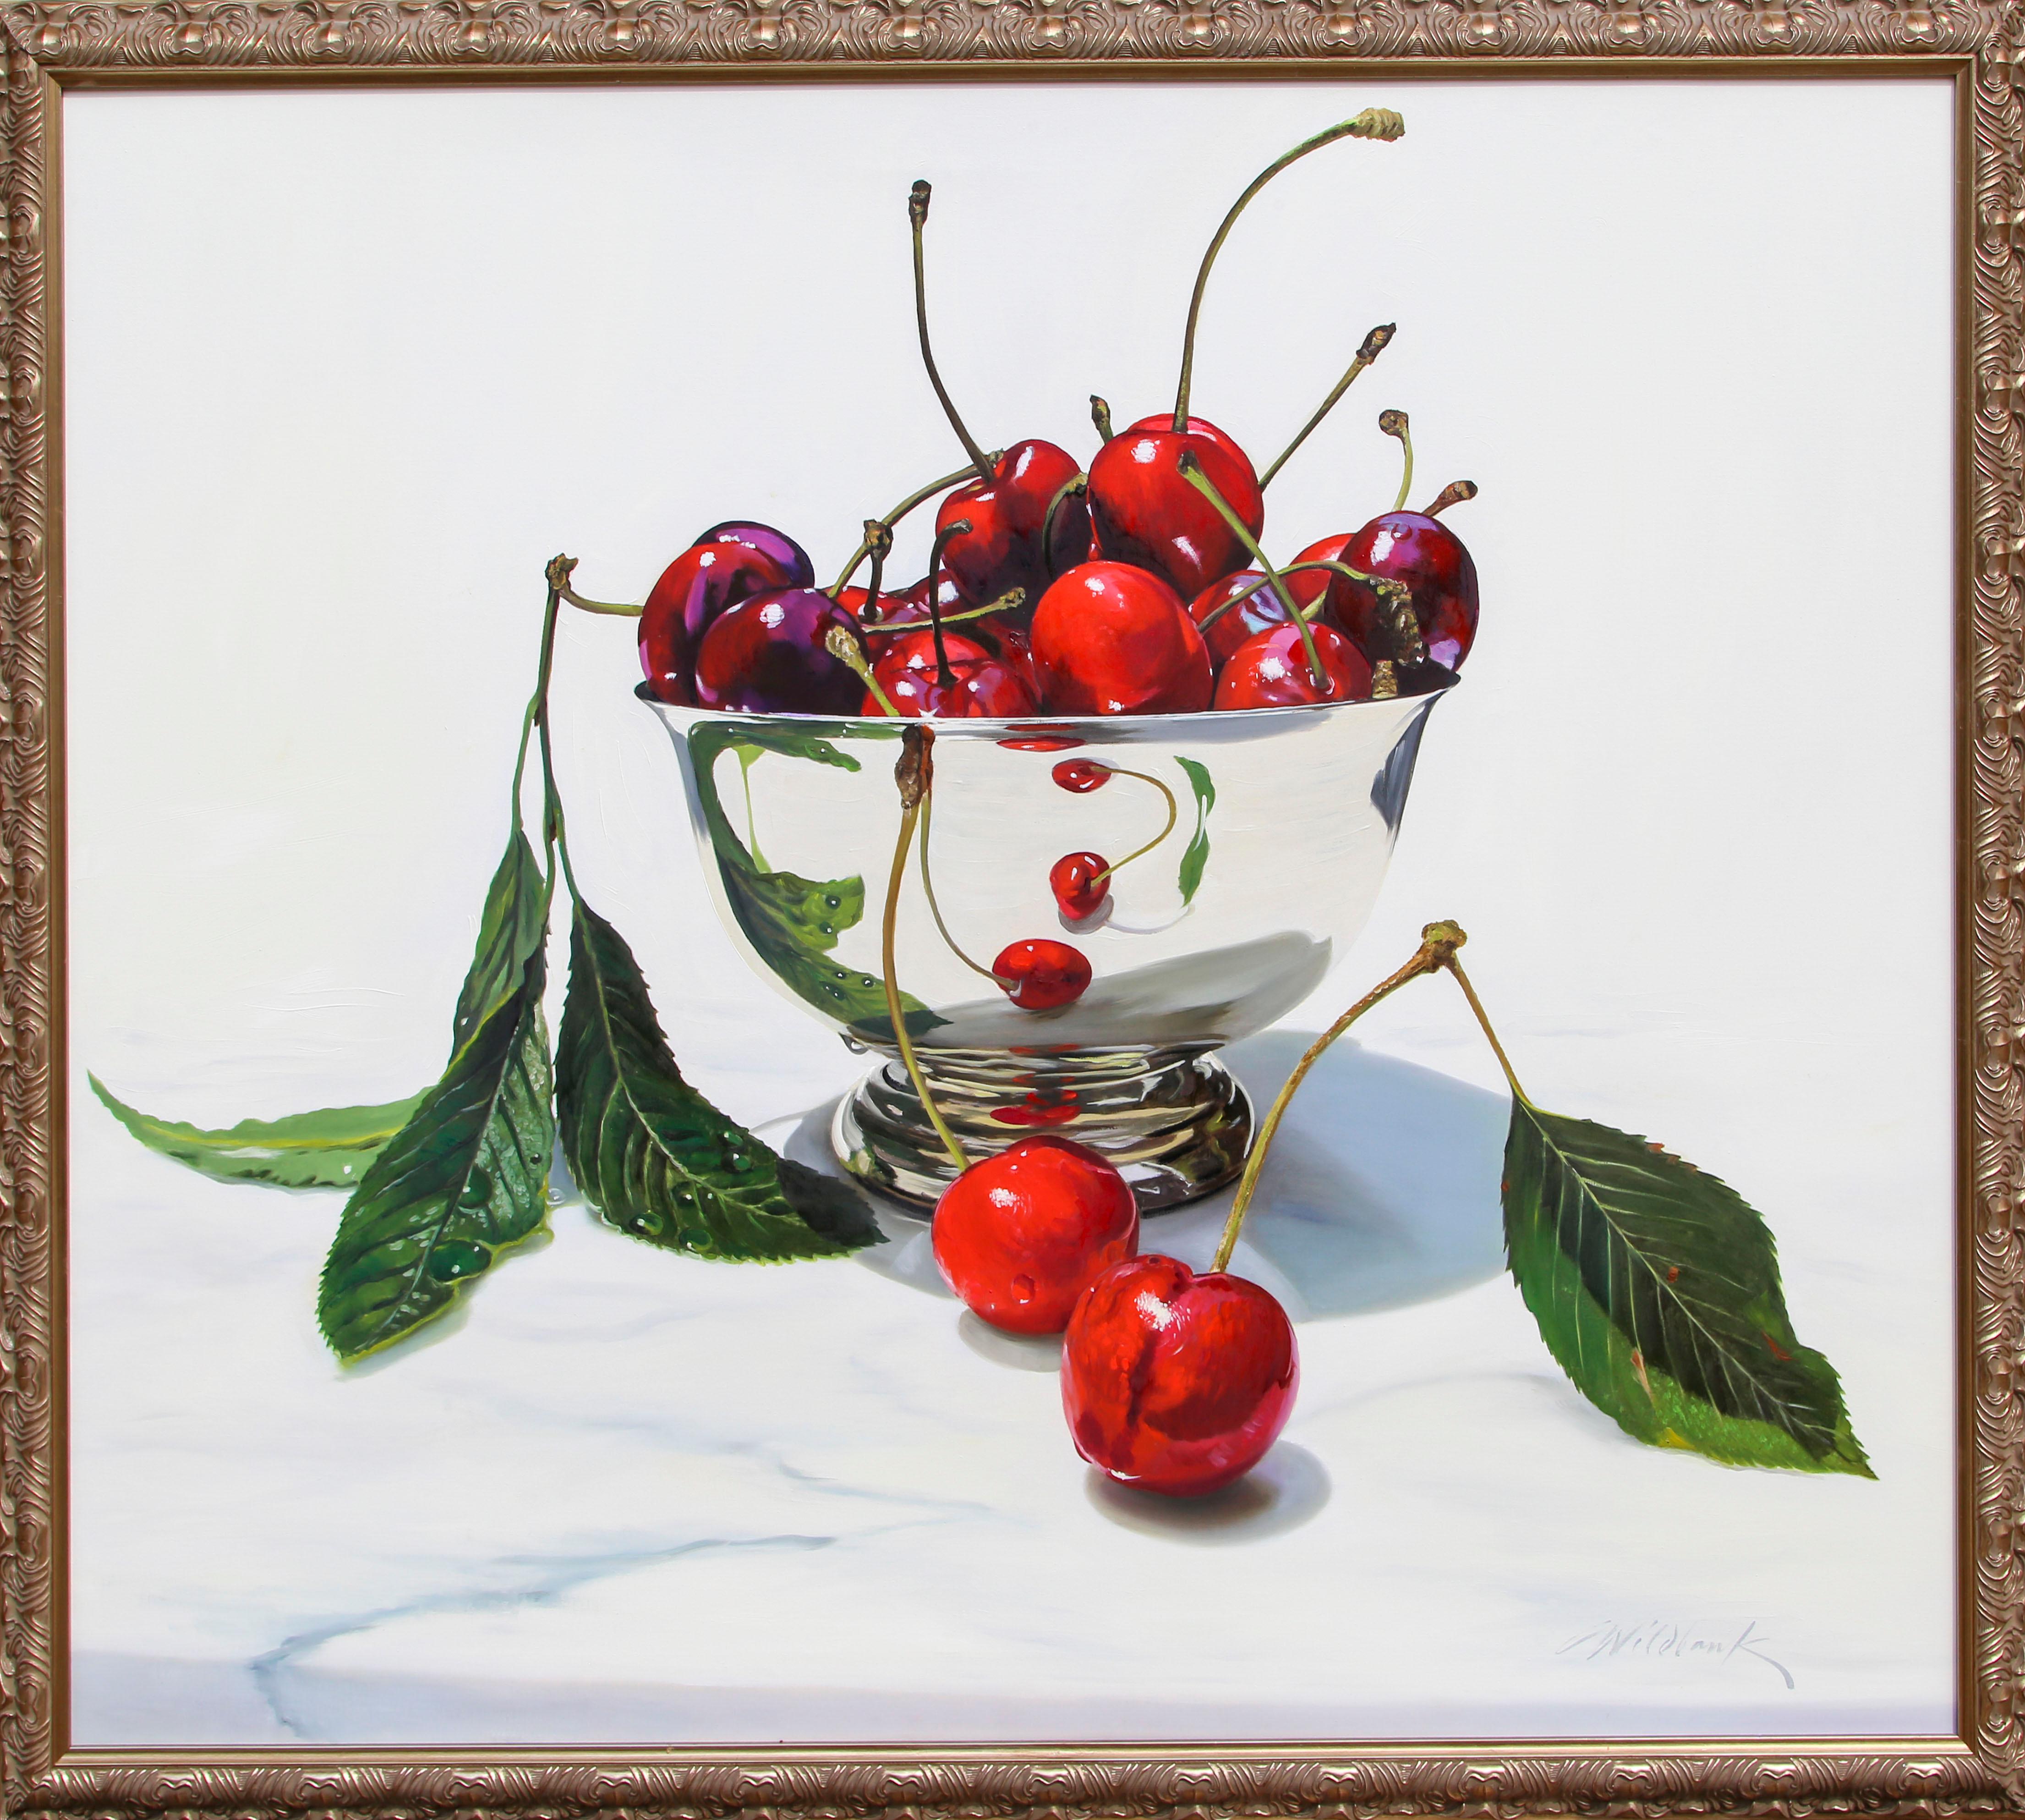 Bowl of Cherries, Photorealist Acrylic Painting by Charles Wildbank